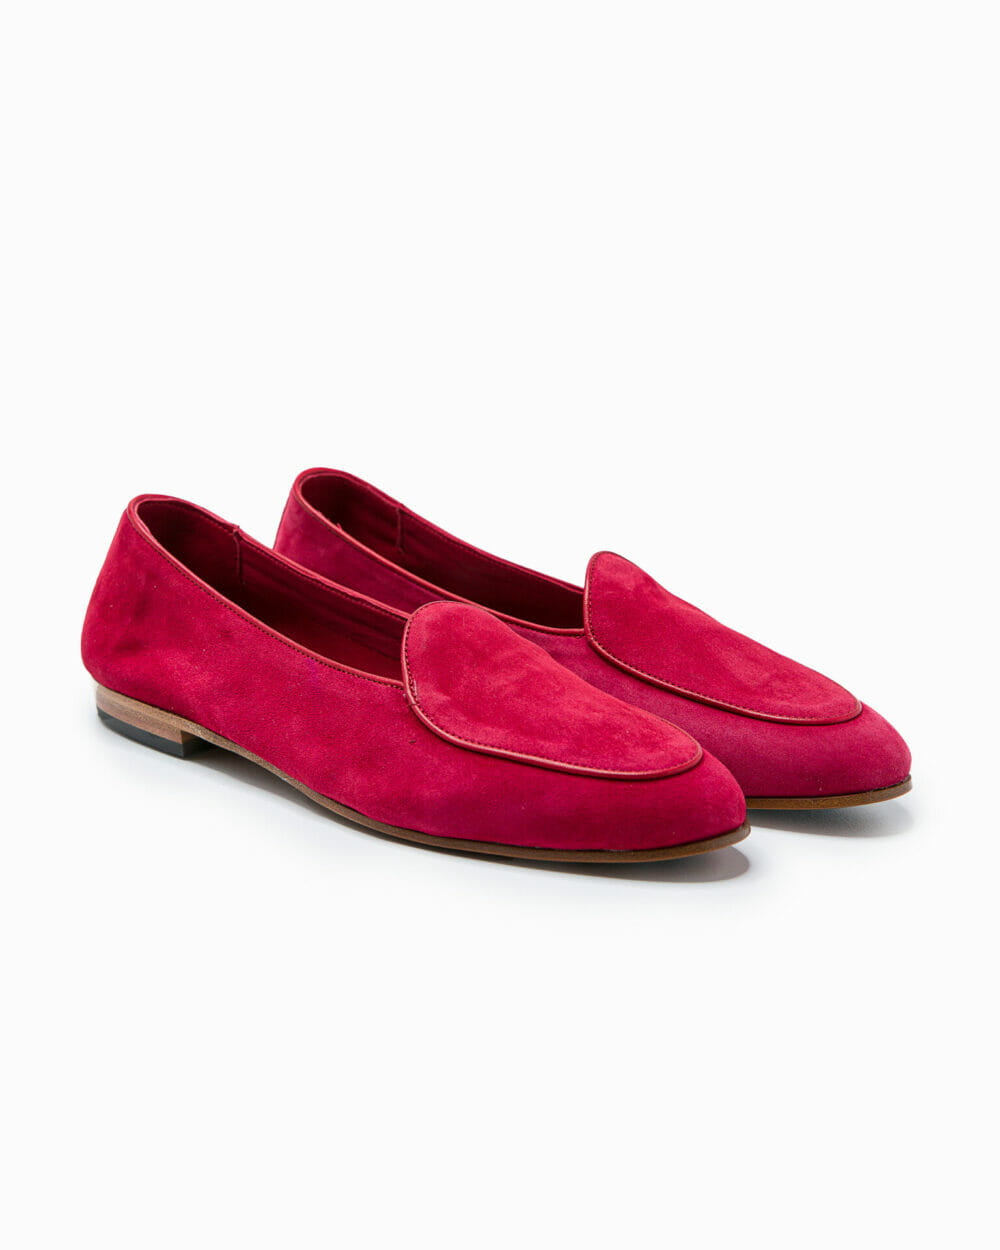 Belgian-d-ls-ruby-red-suede-pair-alligned